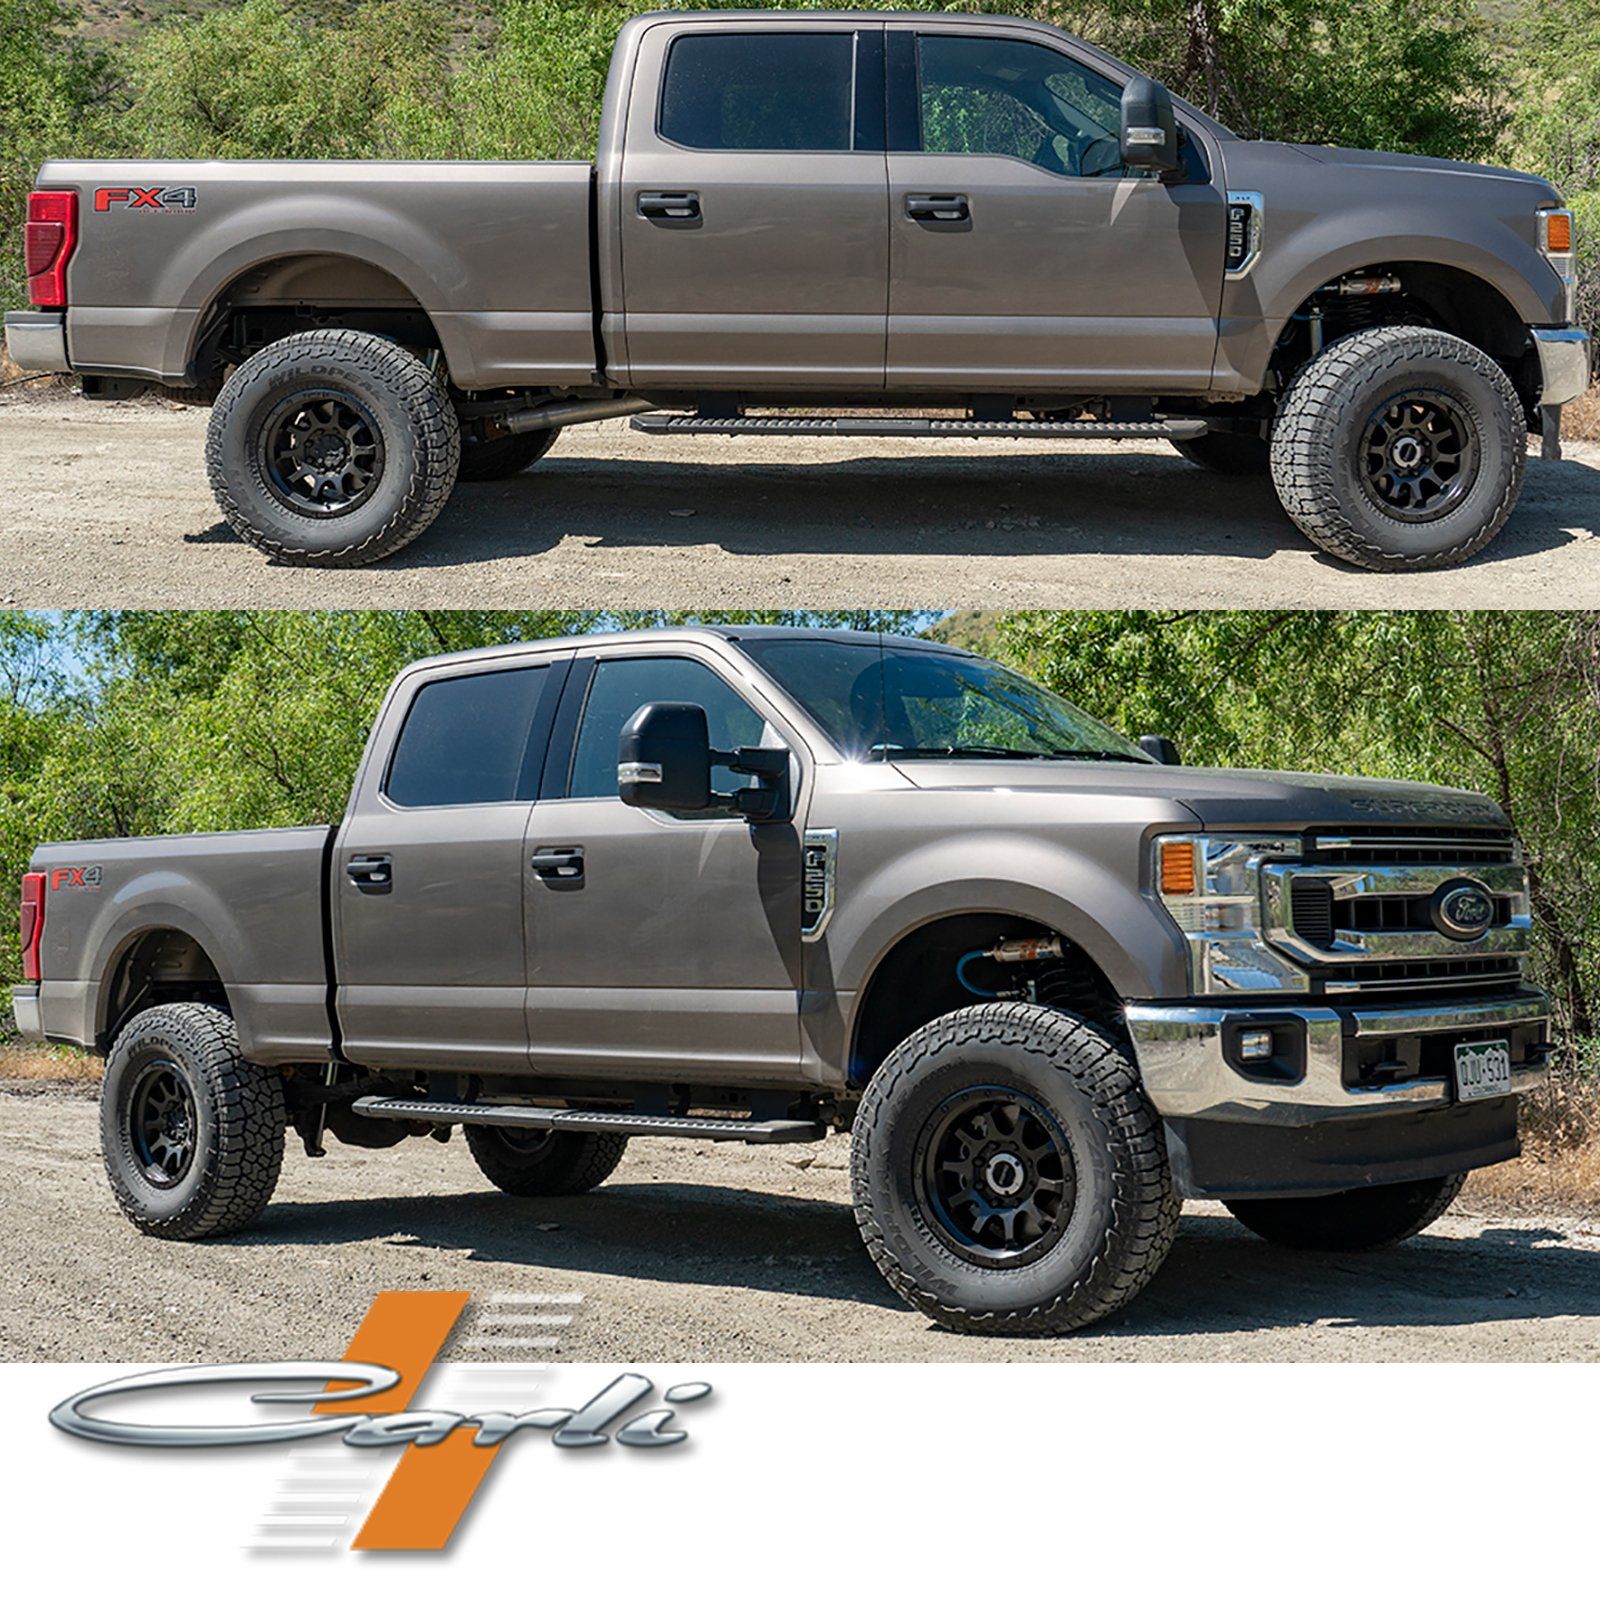 Carli Suspension | '11-Current Ford F250/350 6.2/7.3L Gas Complete Suspension Systems